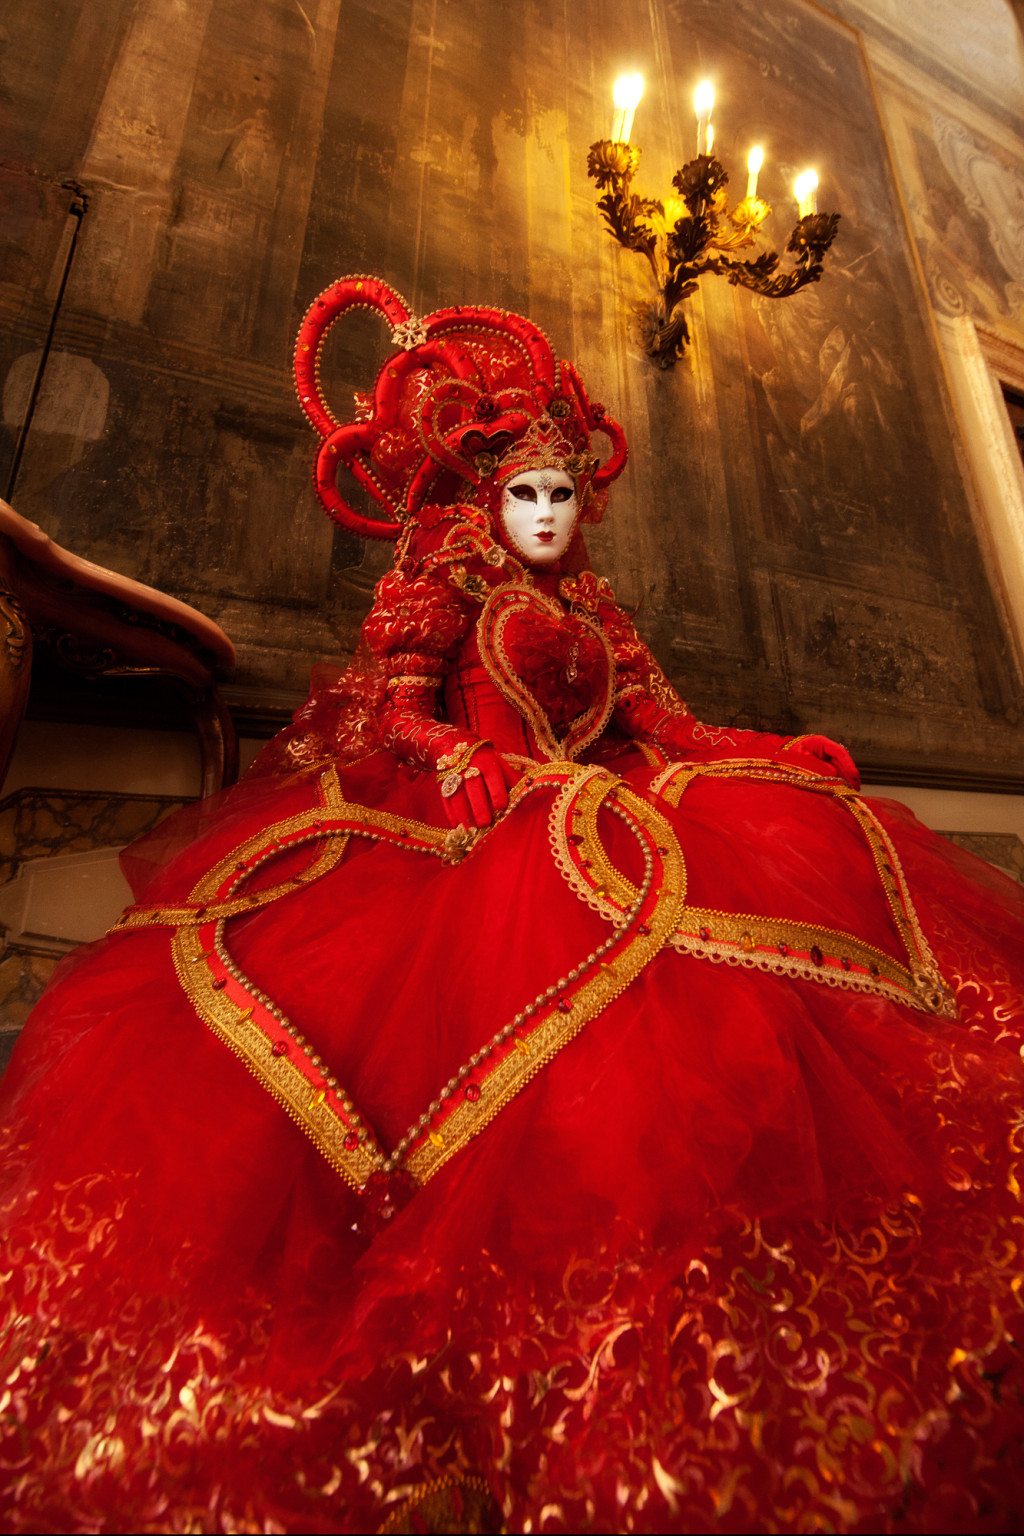 Bright red Carnival costume in a Venice palace